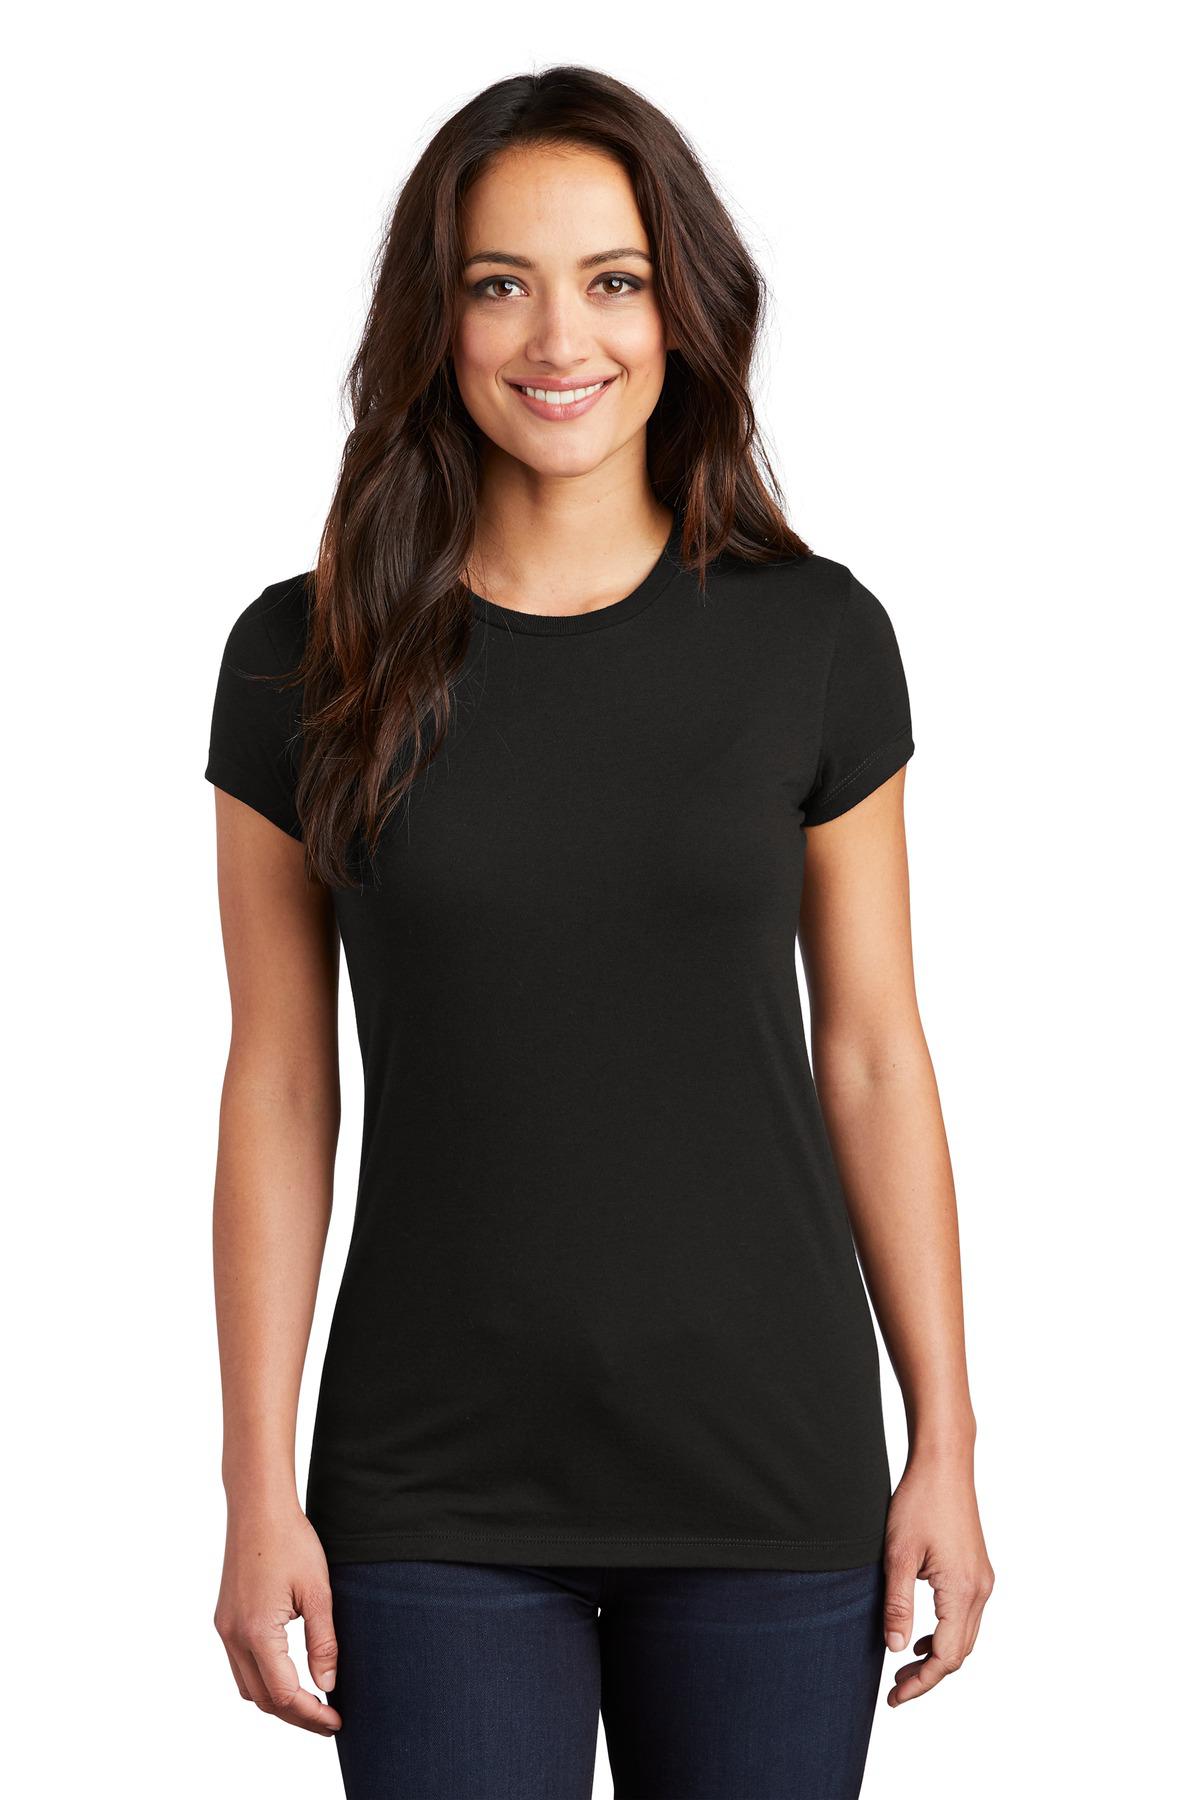 District DT155 Women's Fitted Perfect Tri Tee - Shirtmax